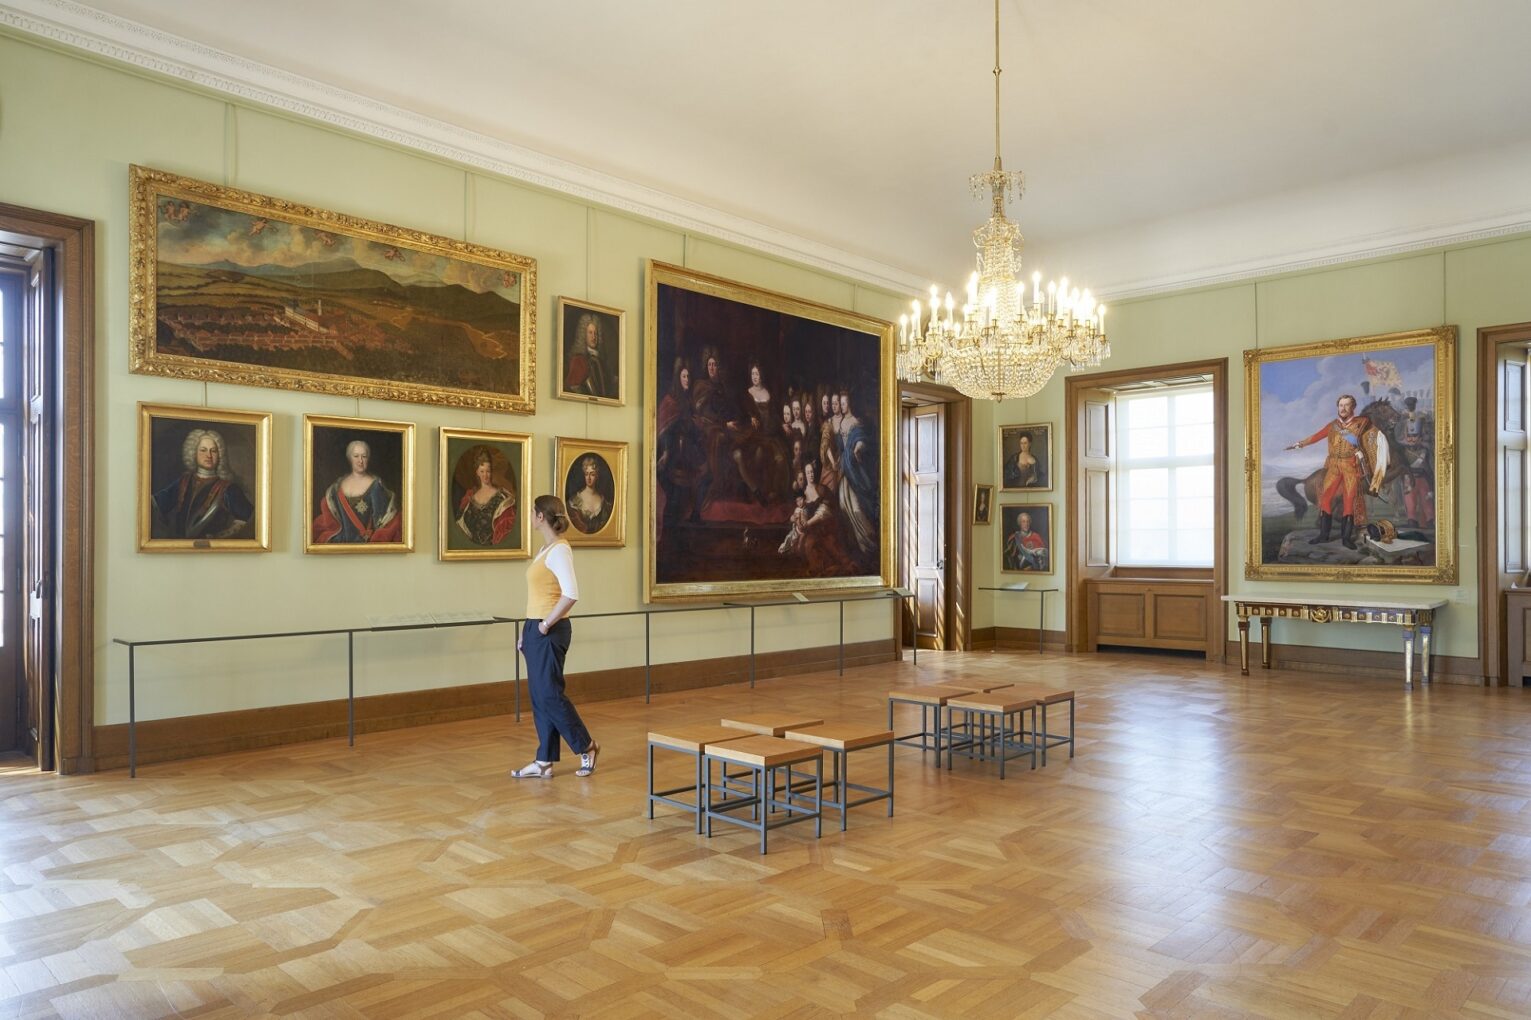 The newly designed ancestral gallery of the palace invites visitors to travel back in time.